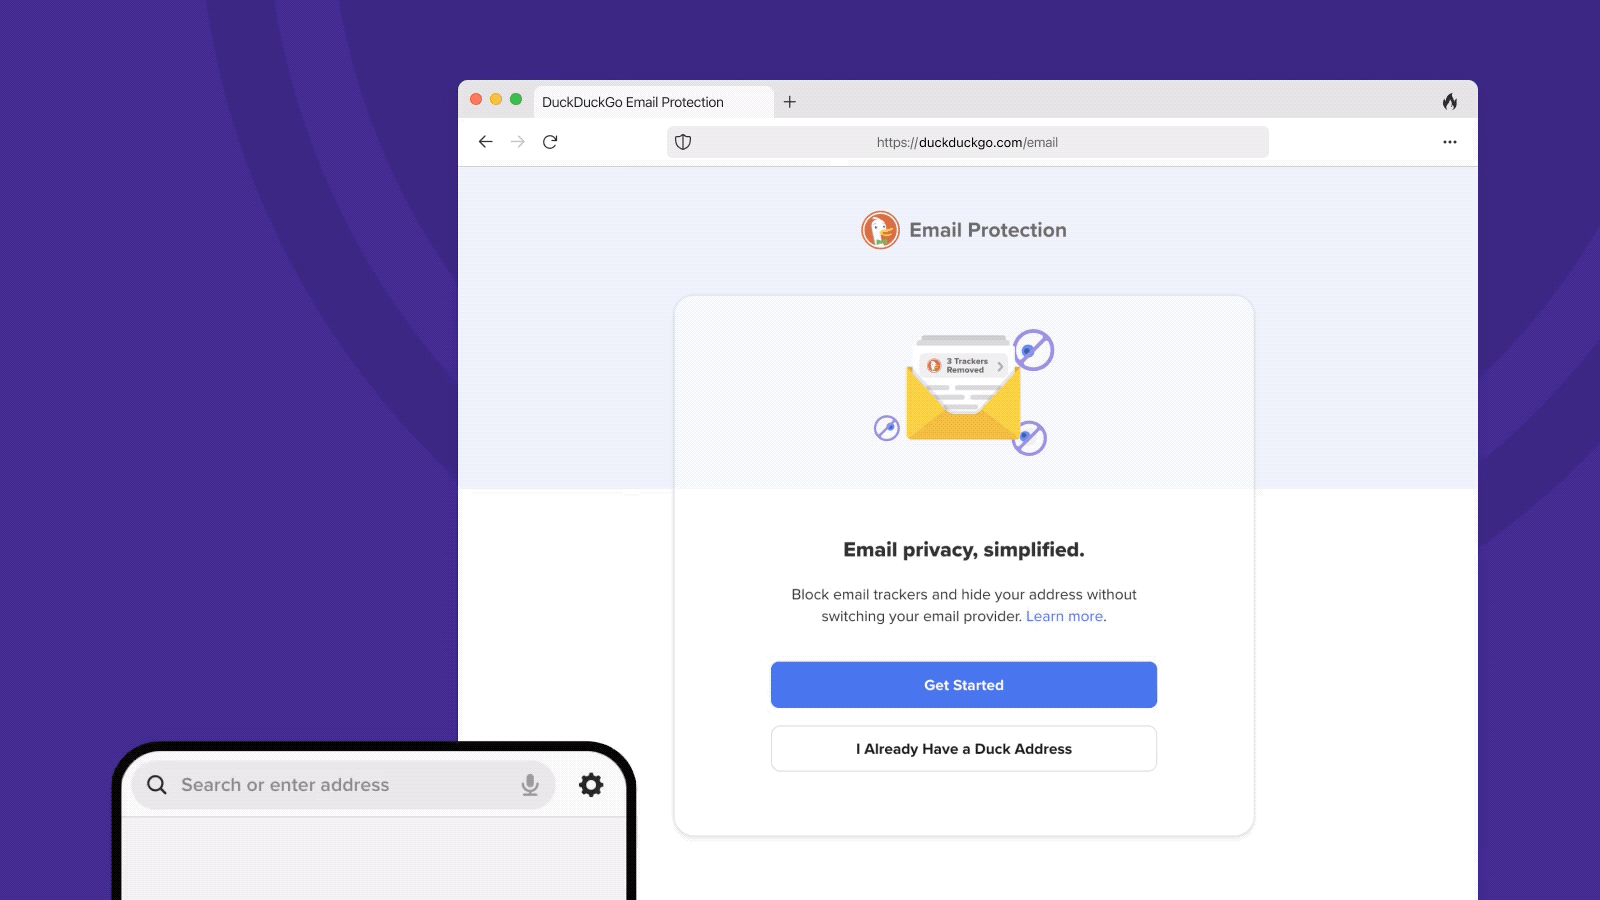 Protect Your Inbox: DuckDuckGo Email Protection Beta Now Open to All!